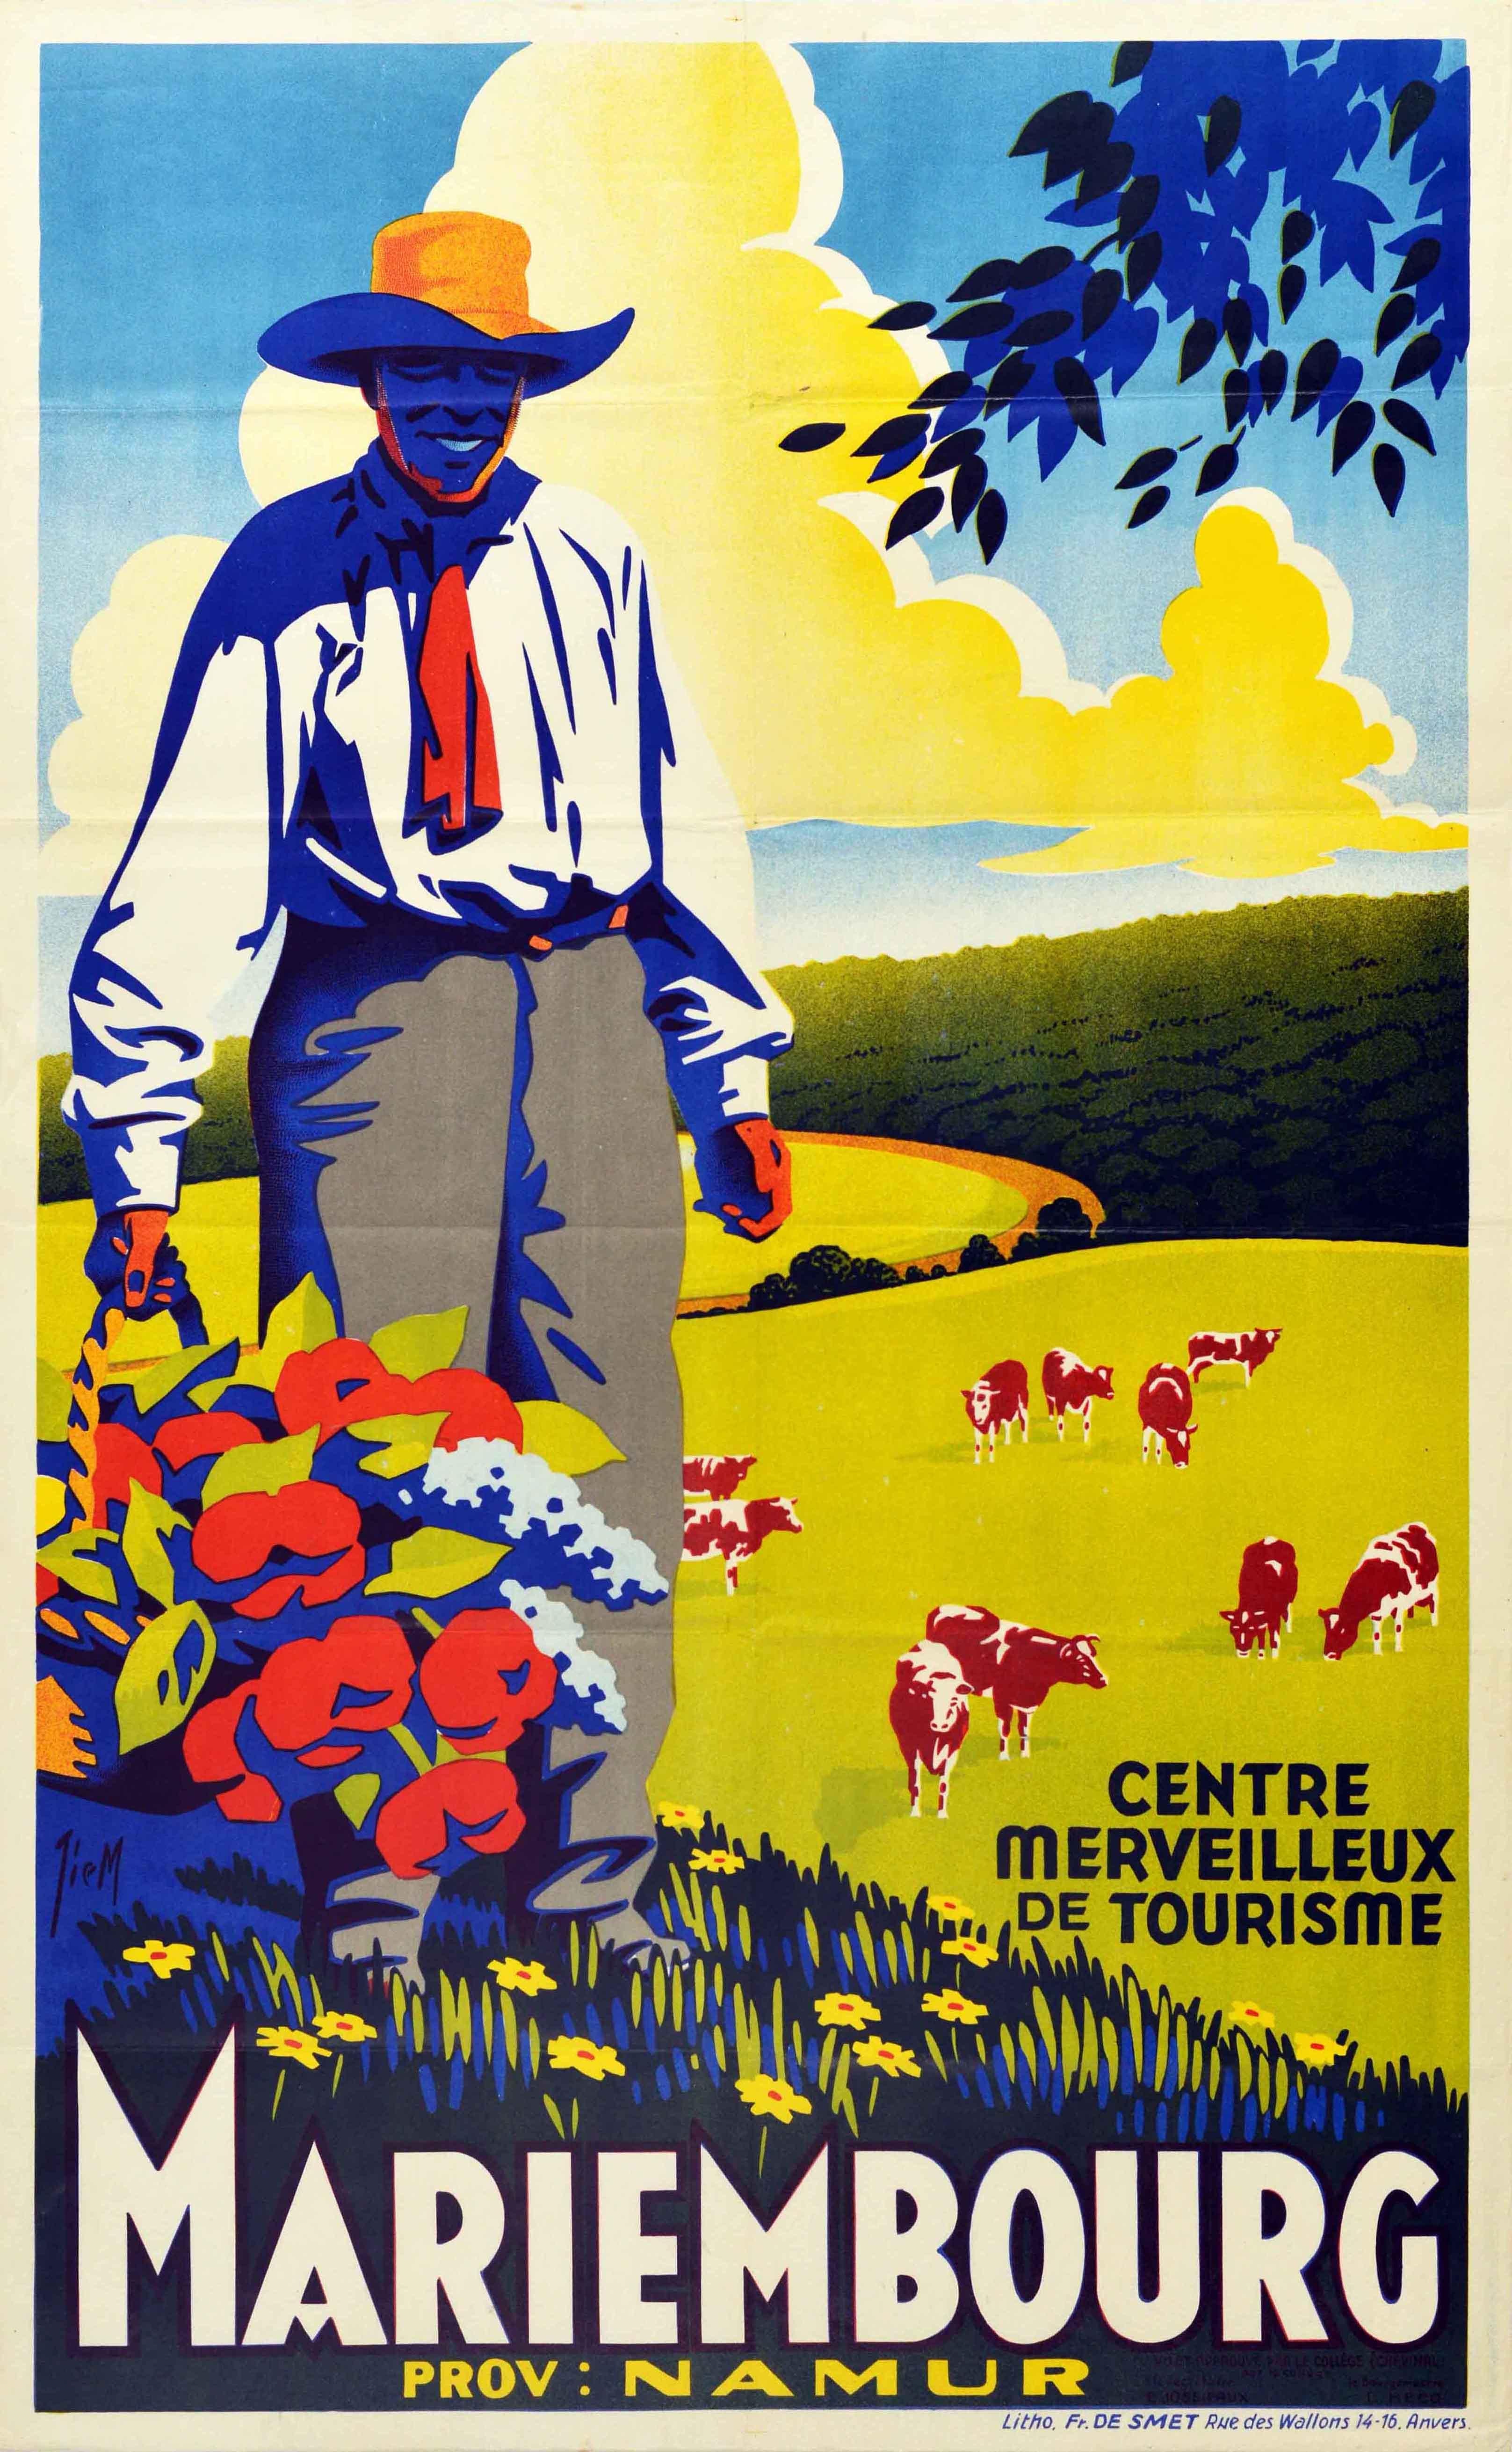 Original vintage travel poster for Mariembourg Prov: Namur depicting a smiling man with a large woven basket of red and purple flowers standing among wildflowers, with brown and white cows grazing grass in a meadow below, and lush woods in the